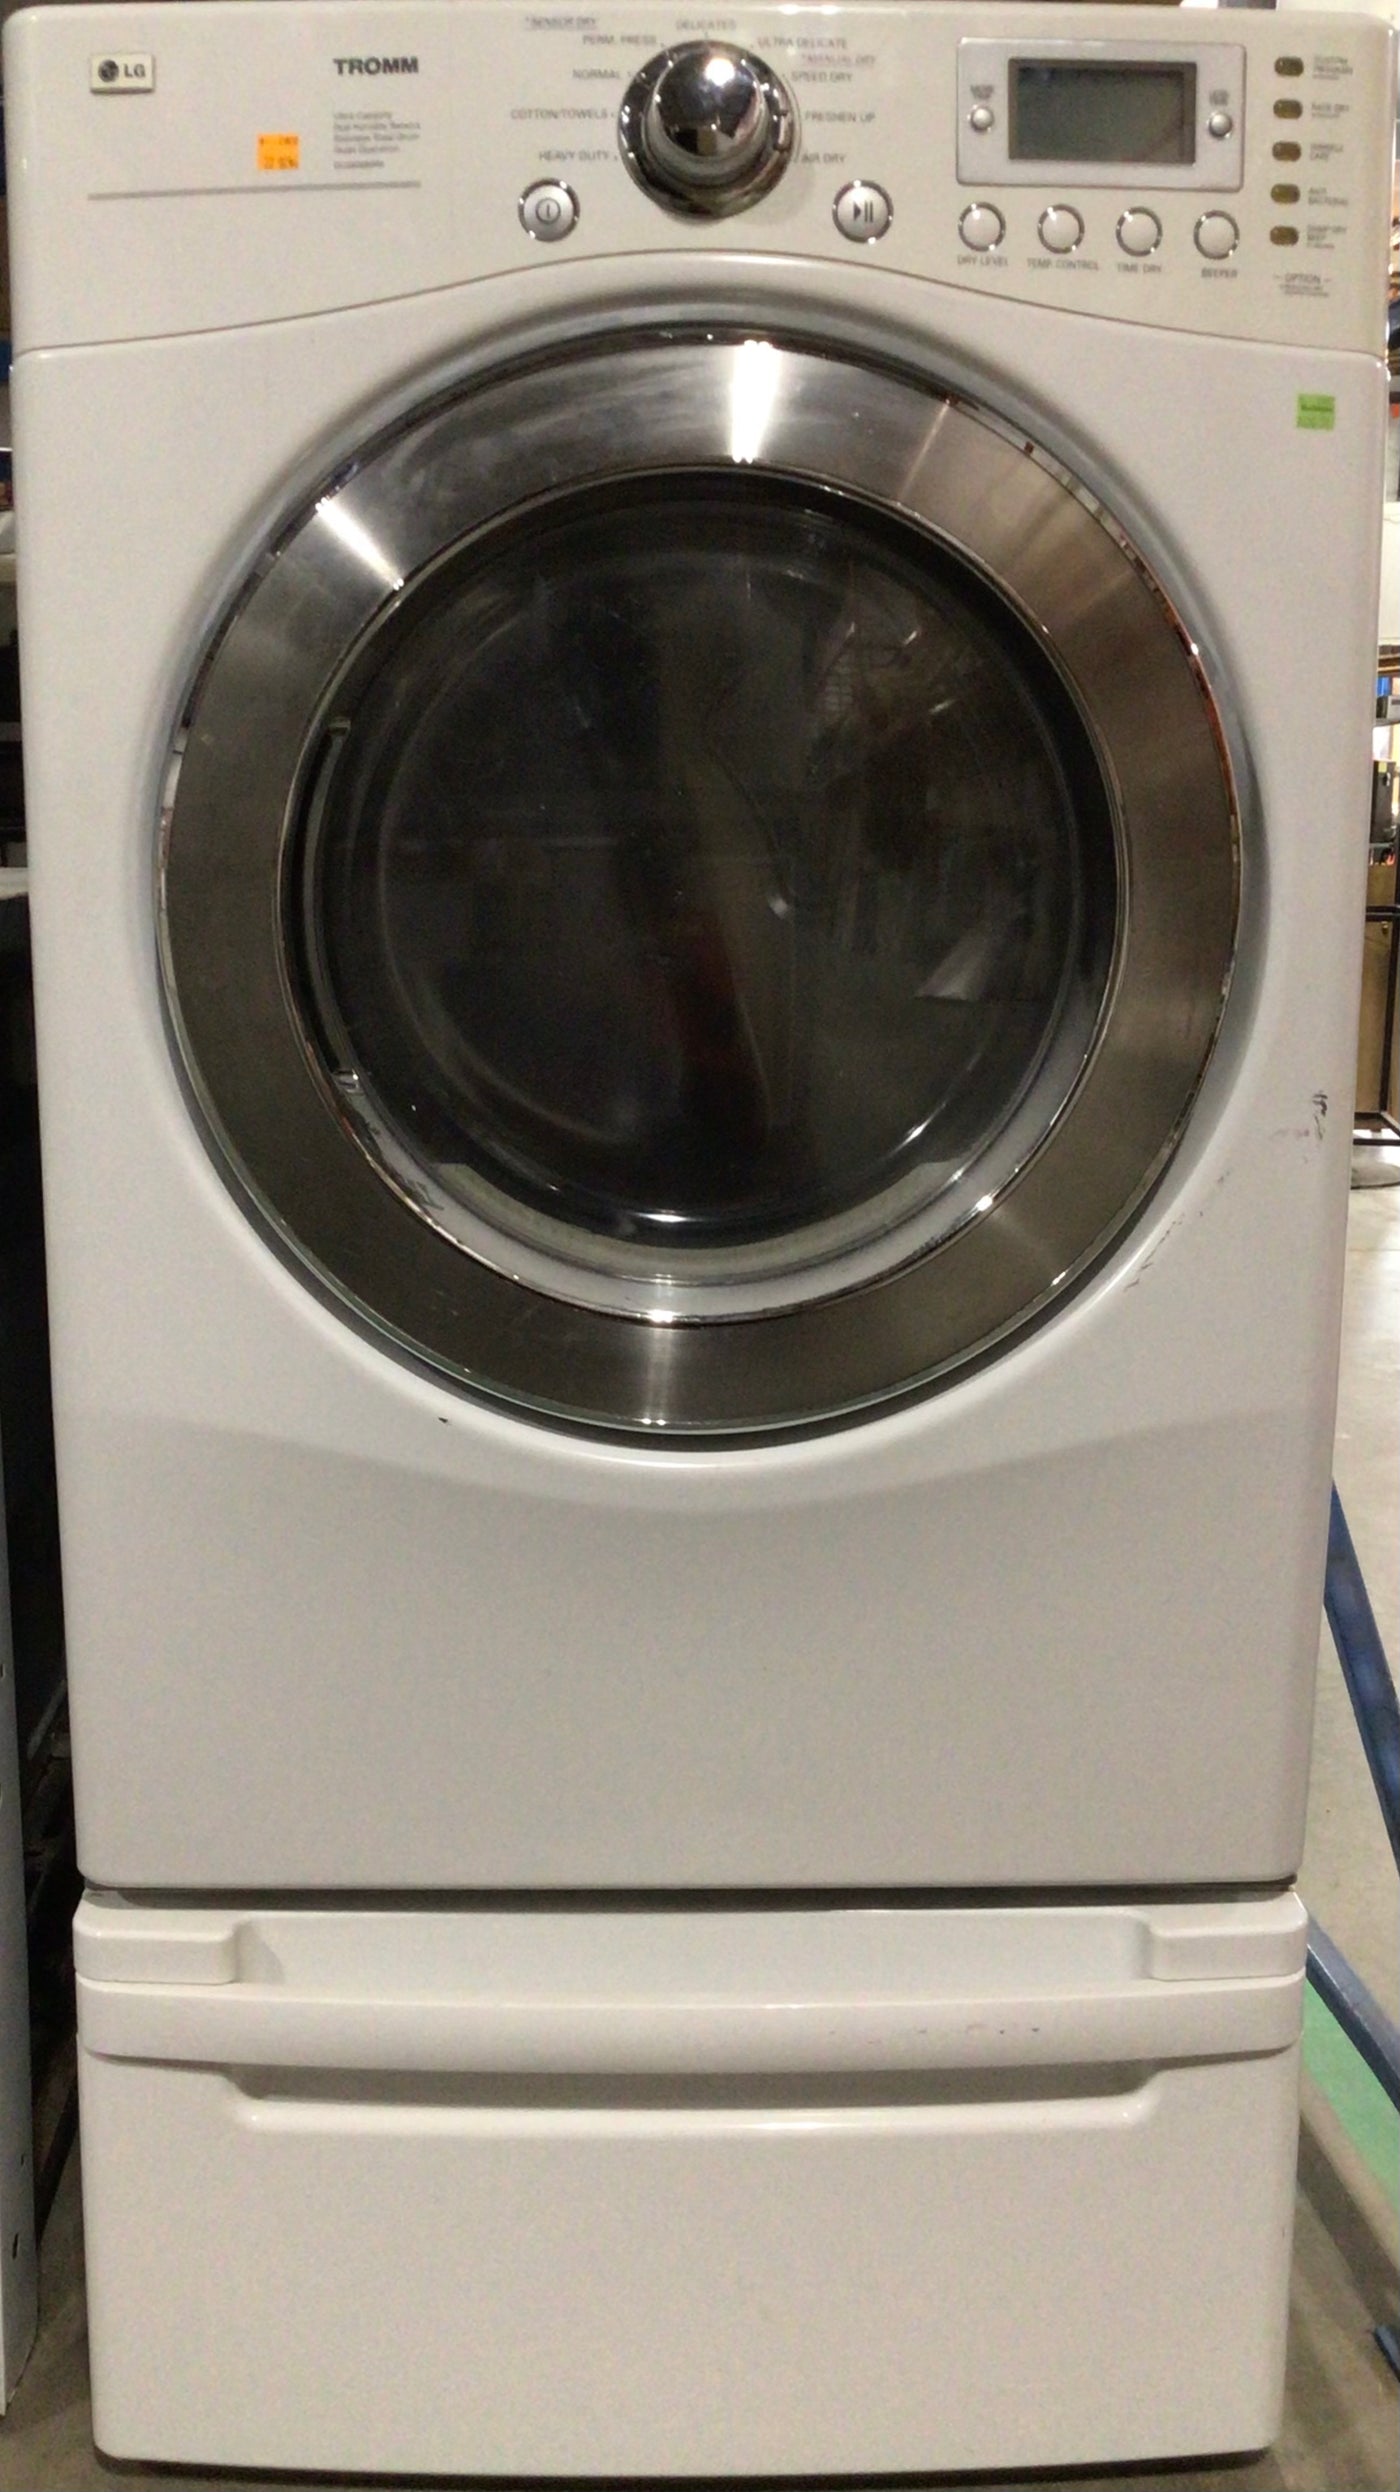 Why Is My LG Dryer Not Drying Completely? - Authorized Service